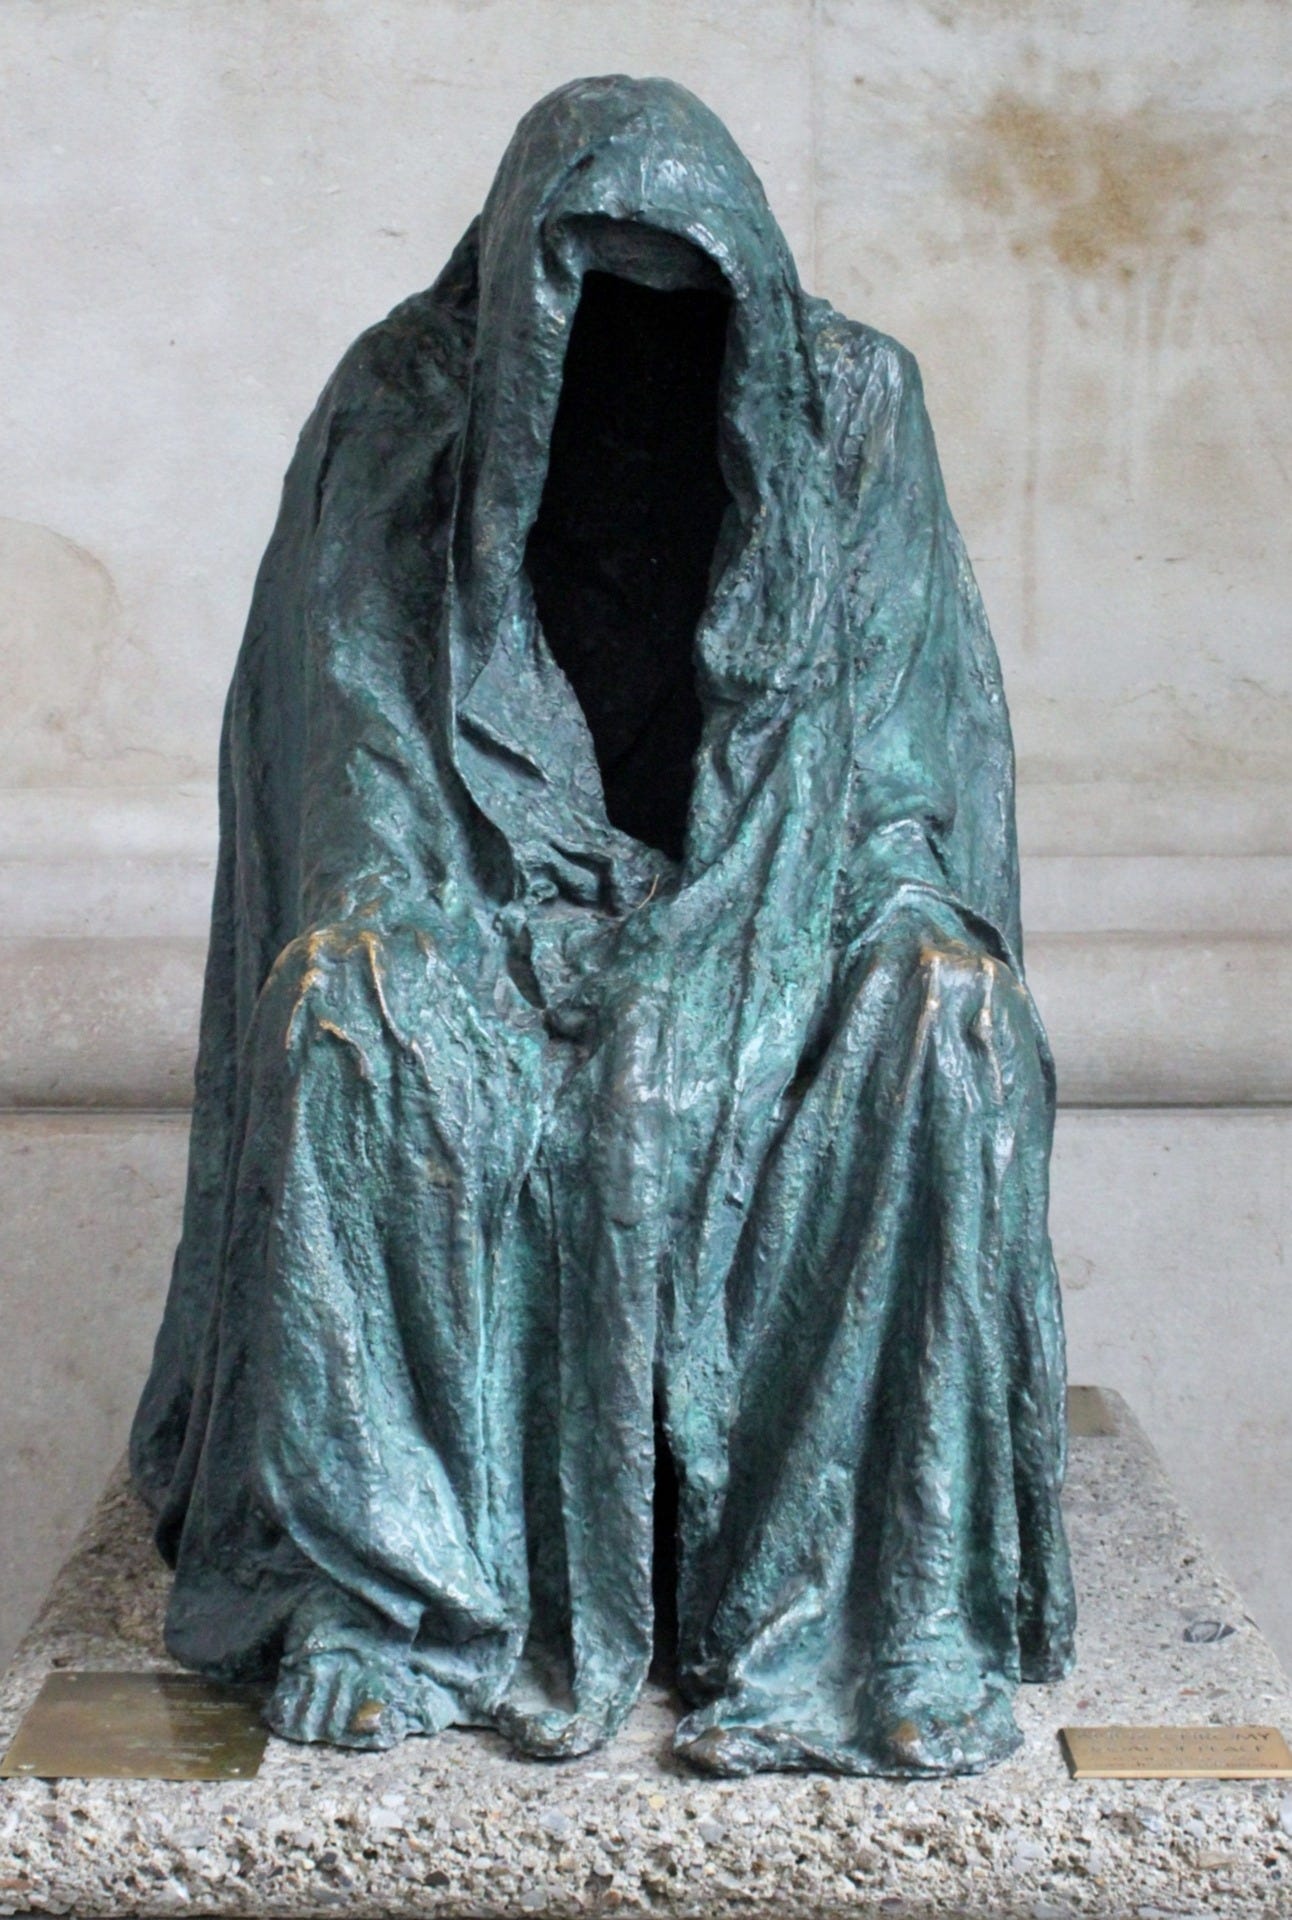 Sculpture of a hooded figure